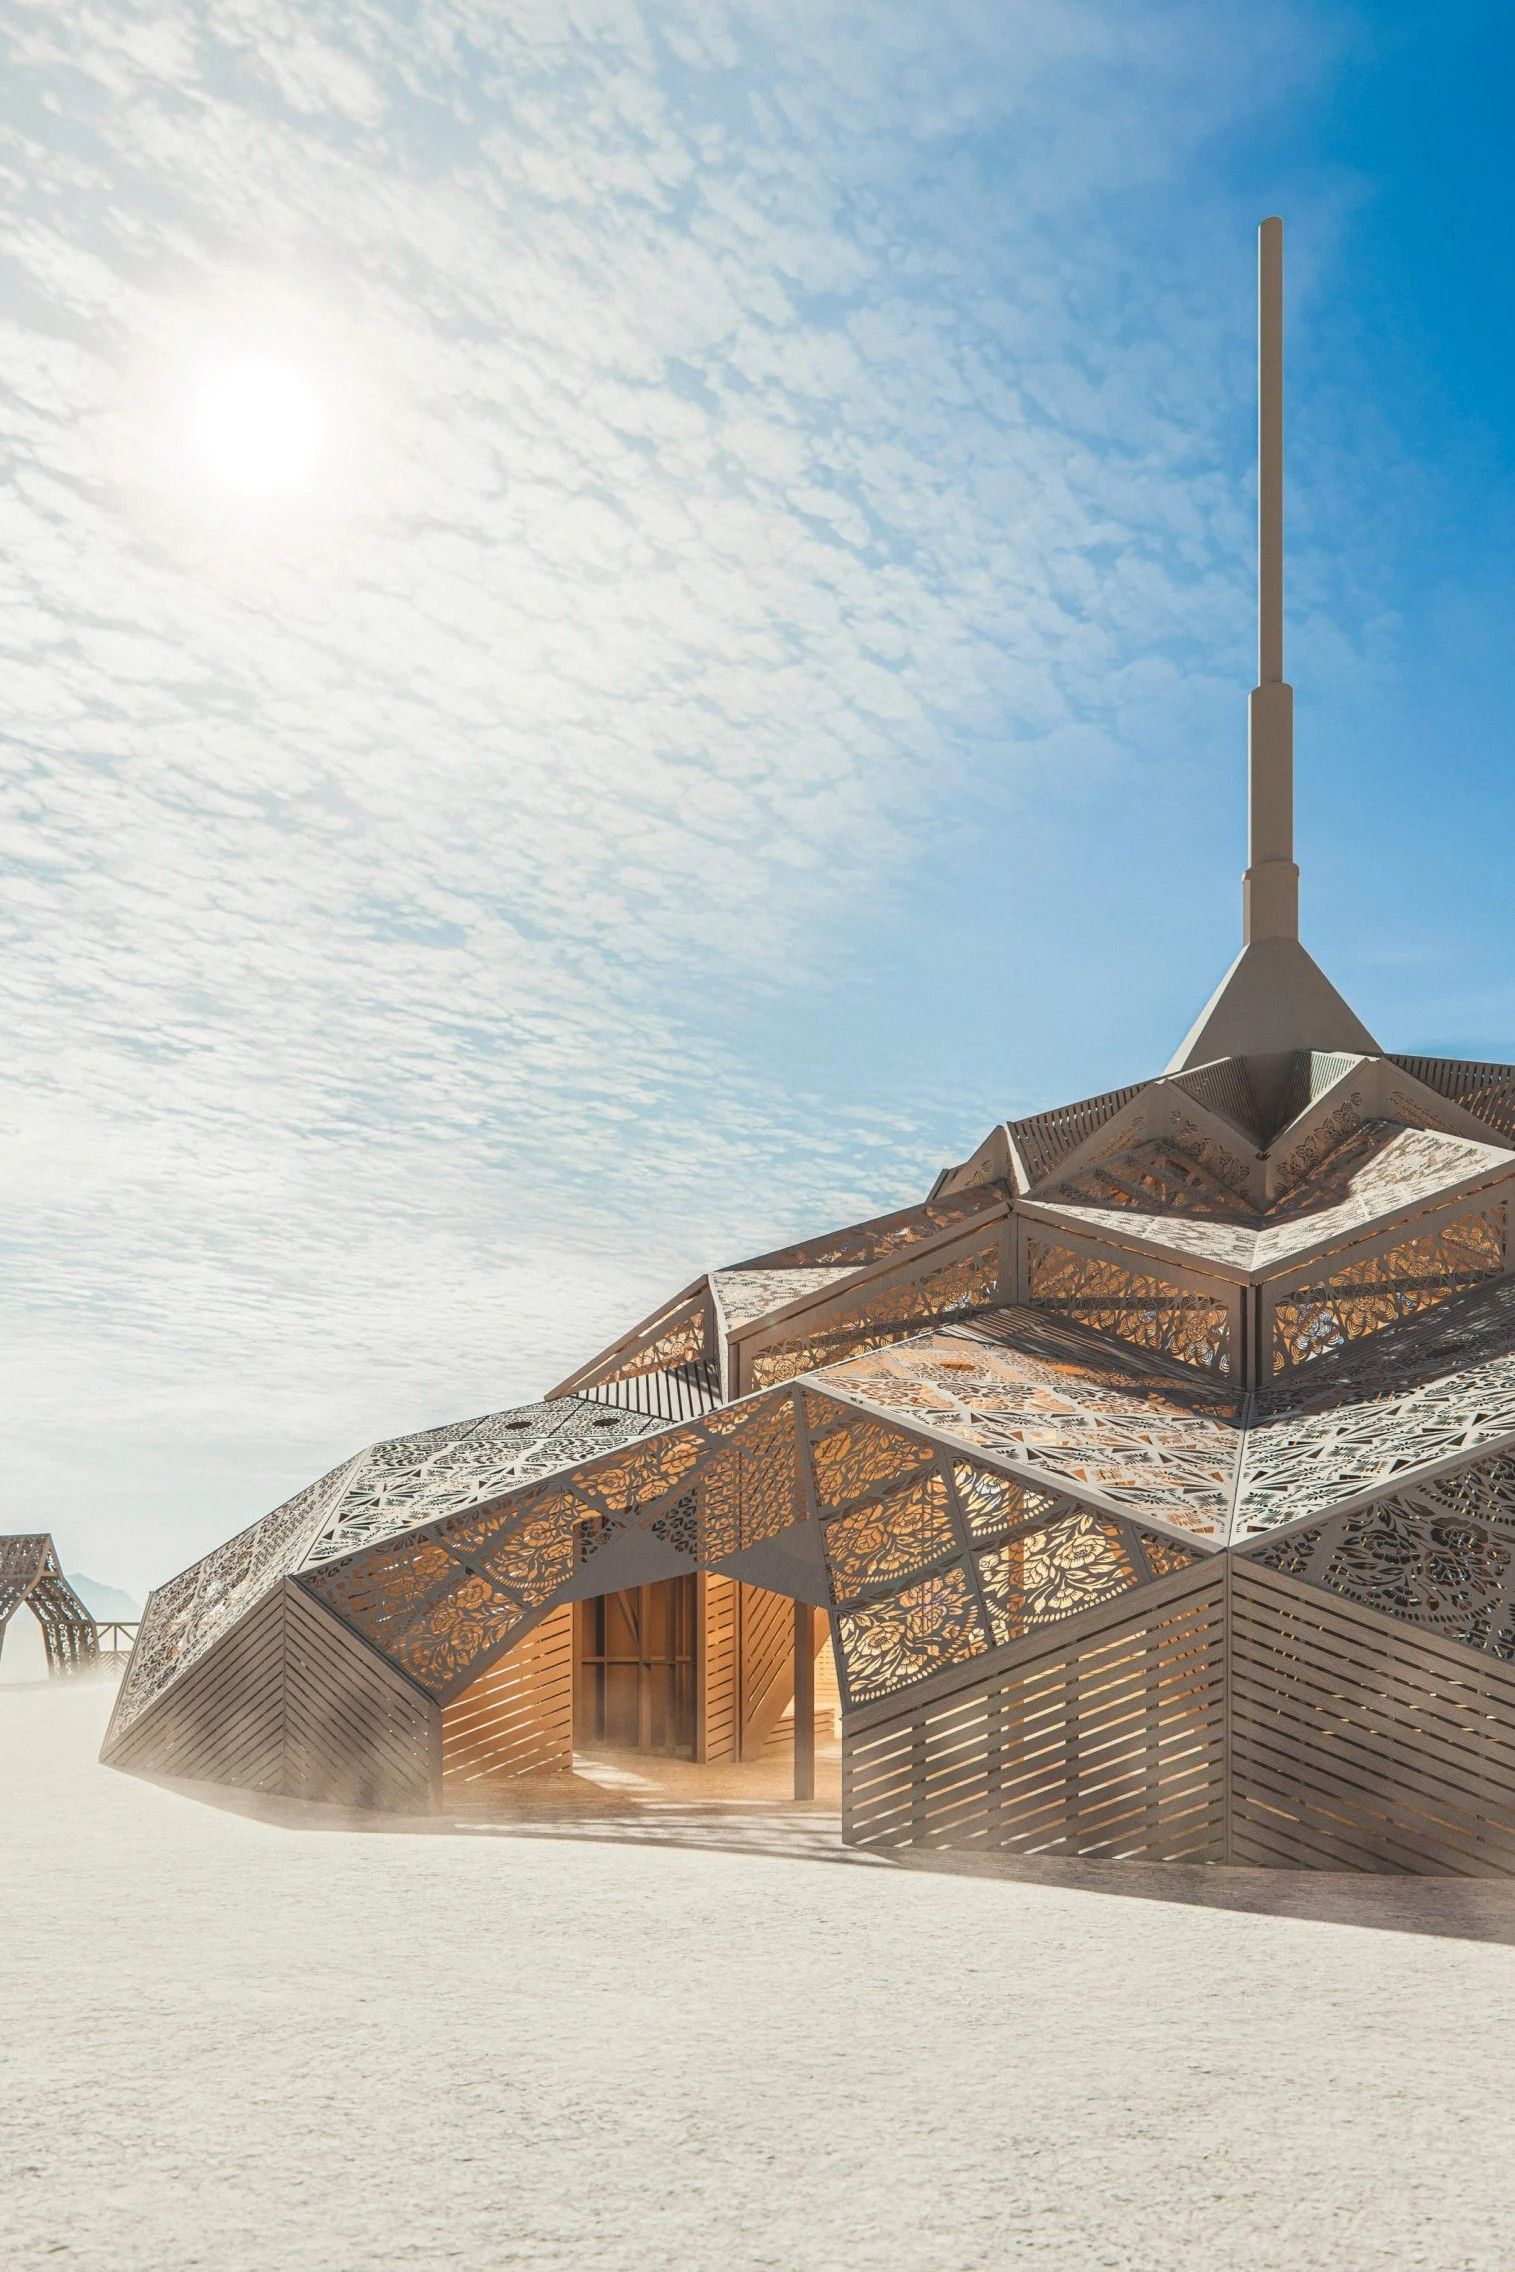 Burning Man 2023 temple designed to show “deepest potential of